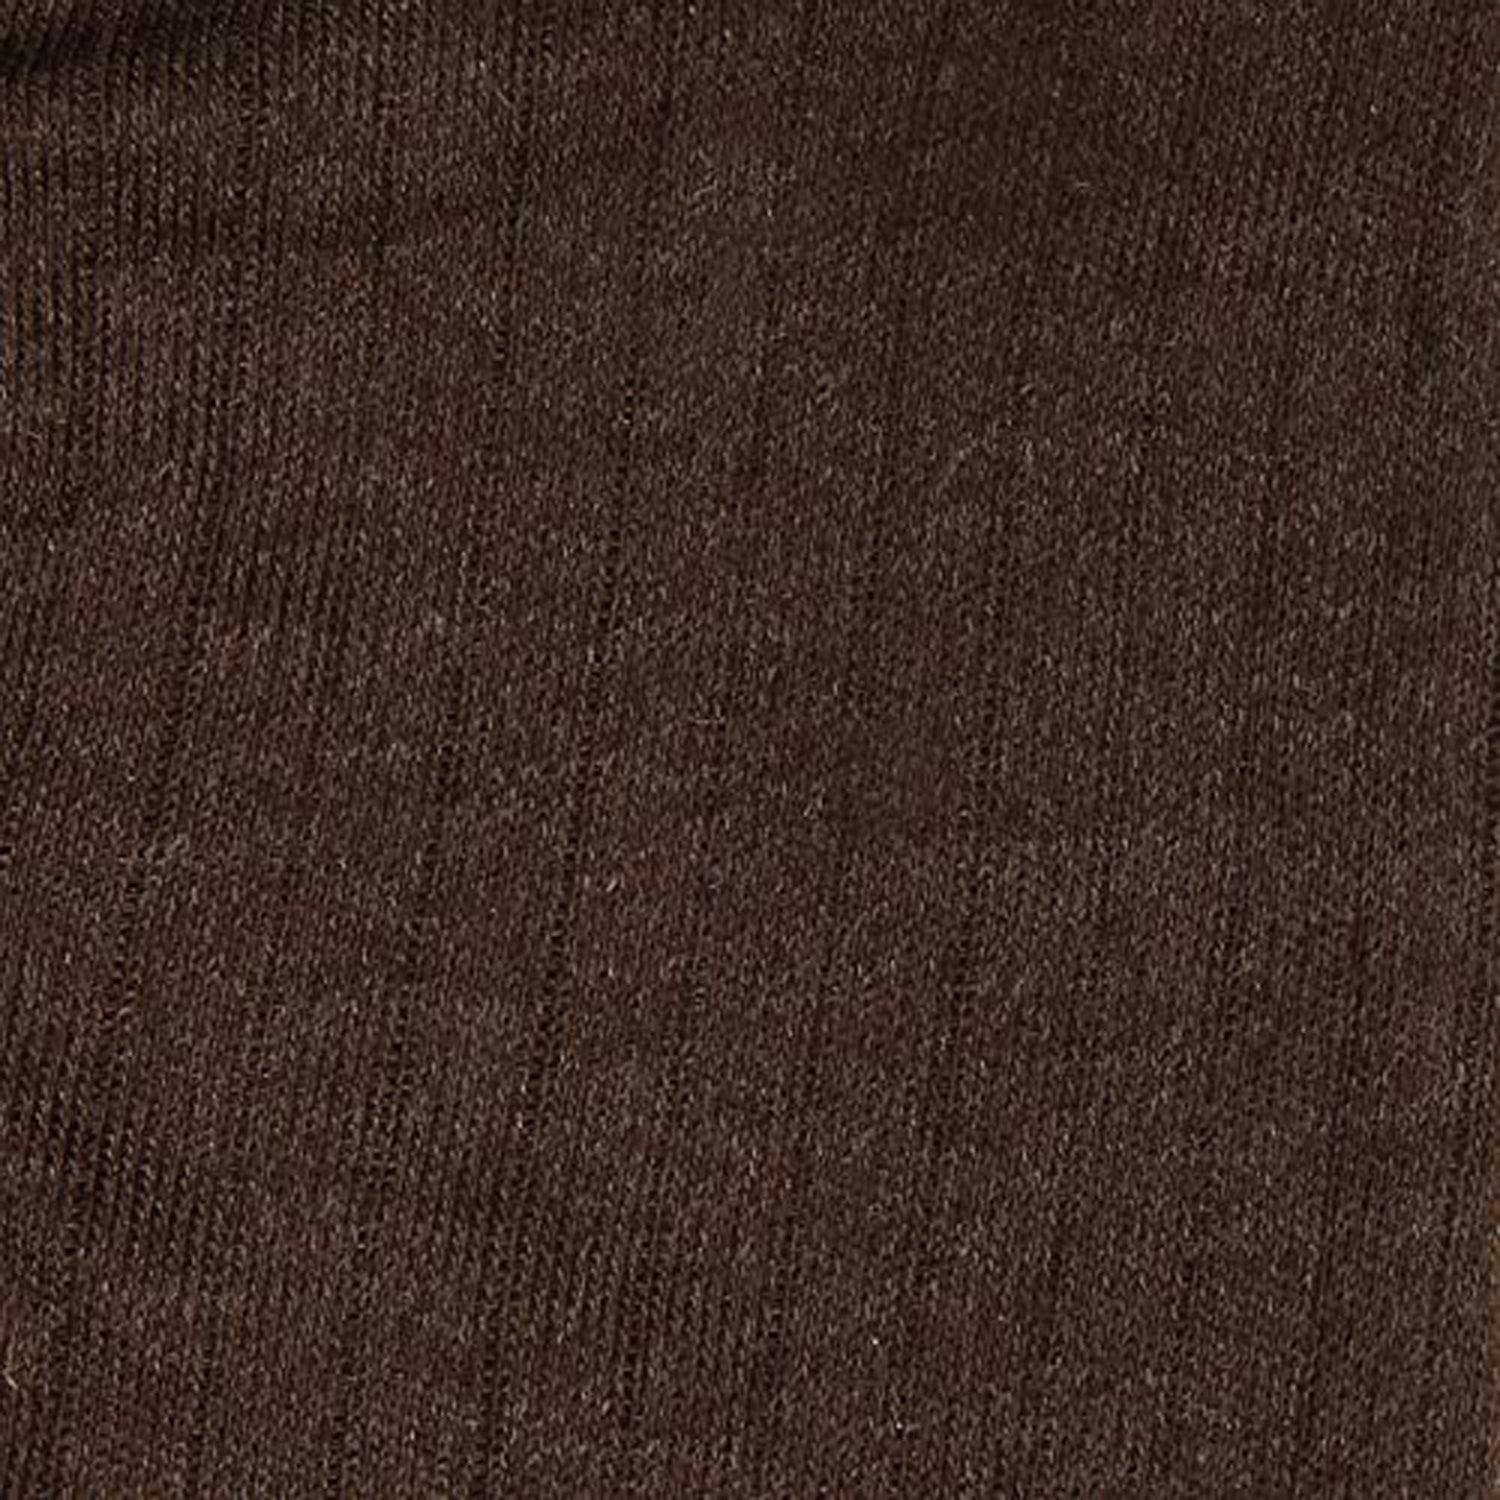 Warm and Cozy Milanch Thermals for Babies (Brown, Pack of 1)